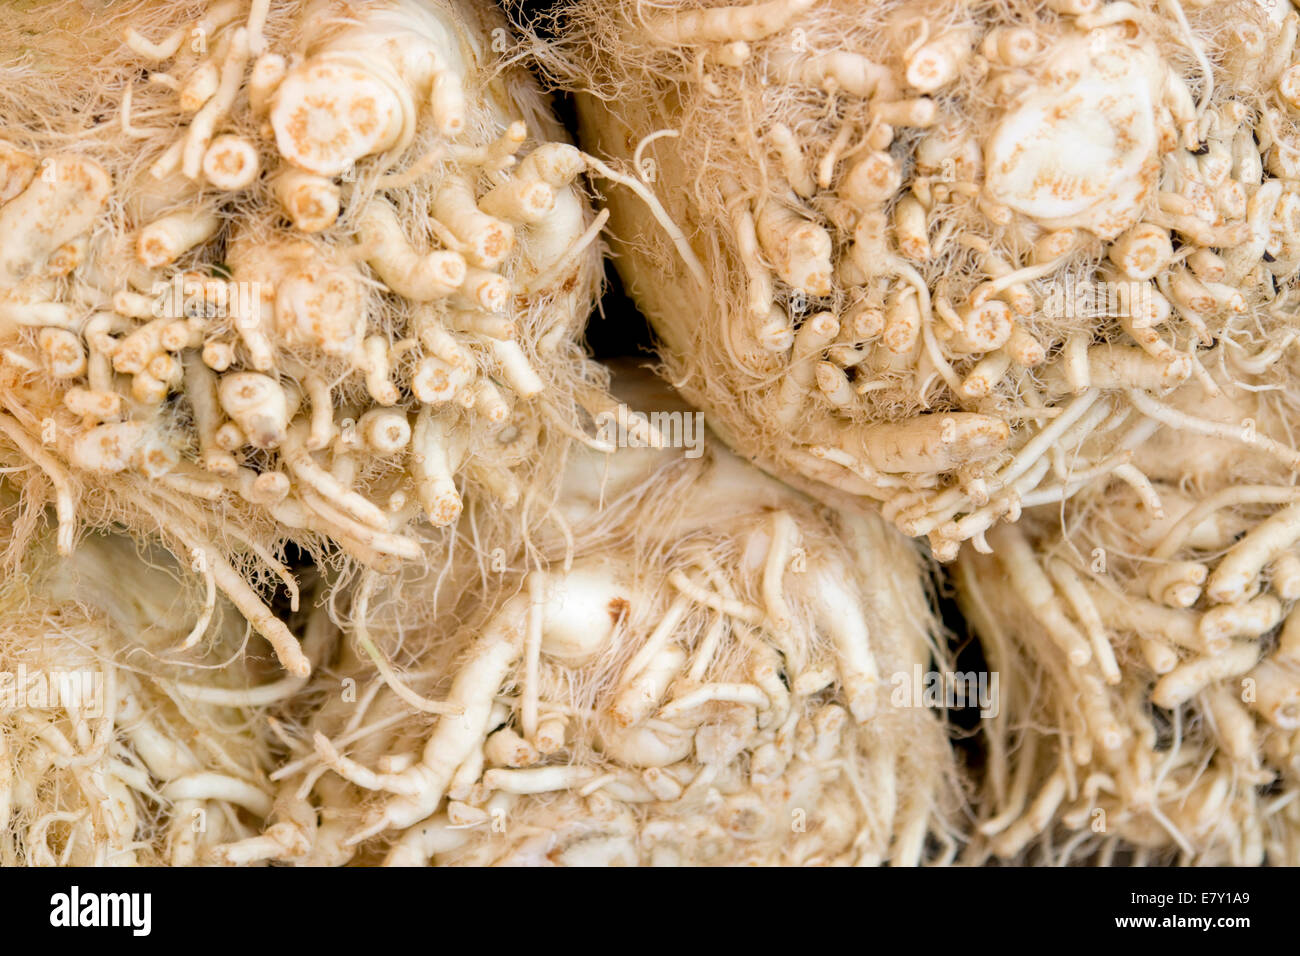 abstract full frame background showing some rooty celery Stock Photo